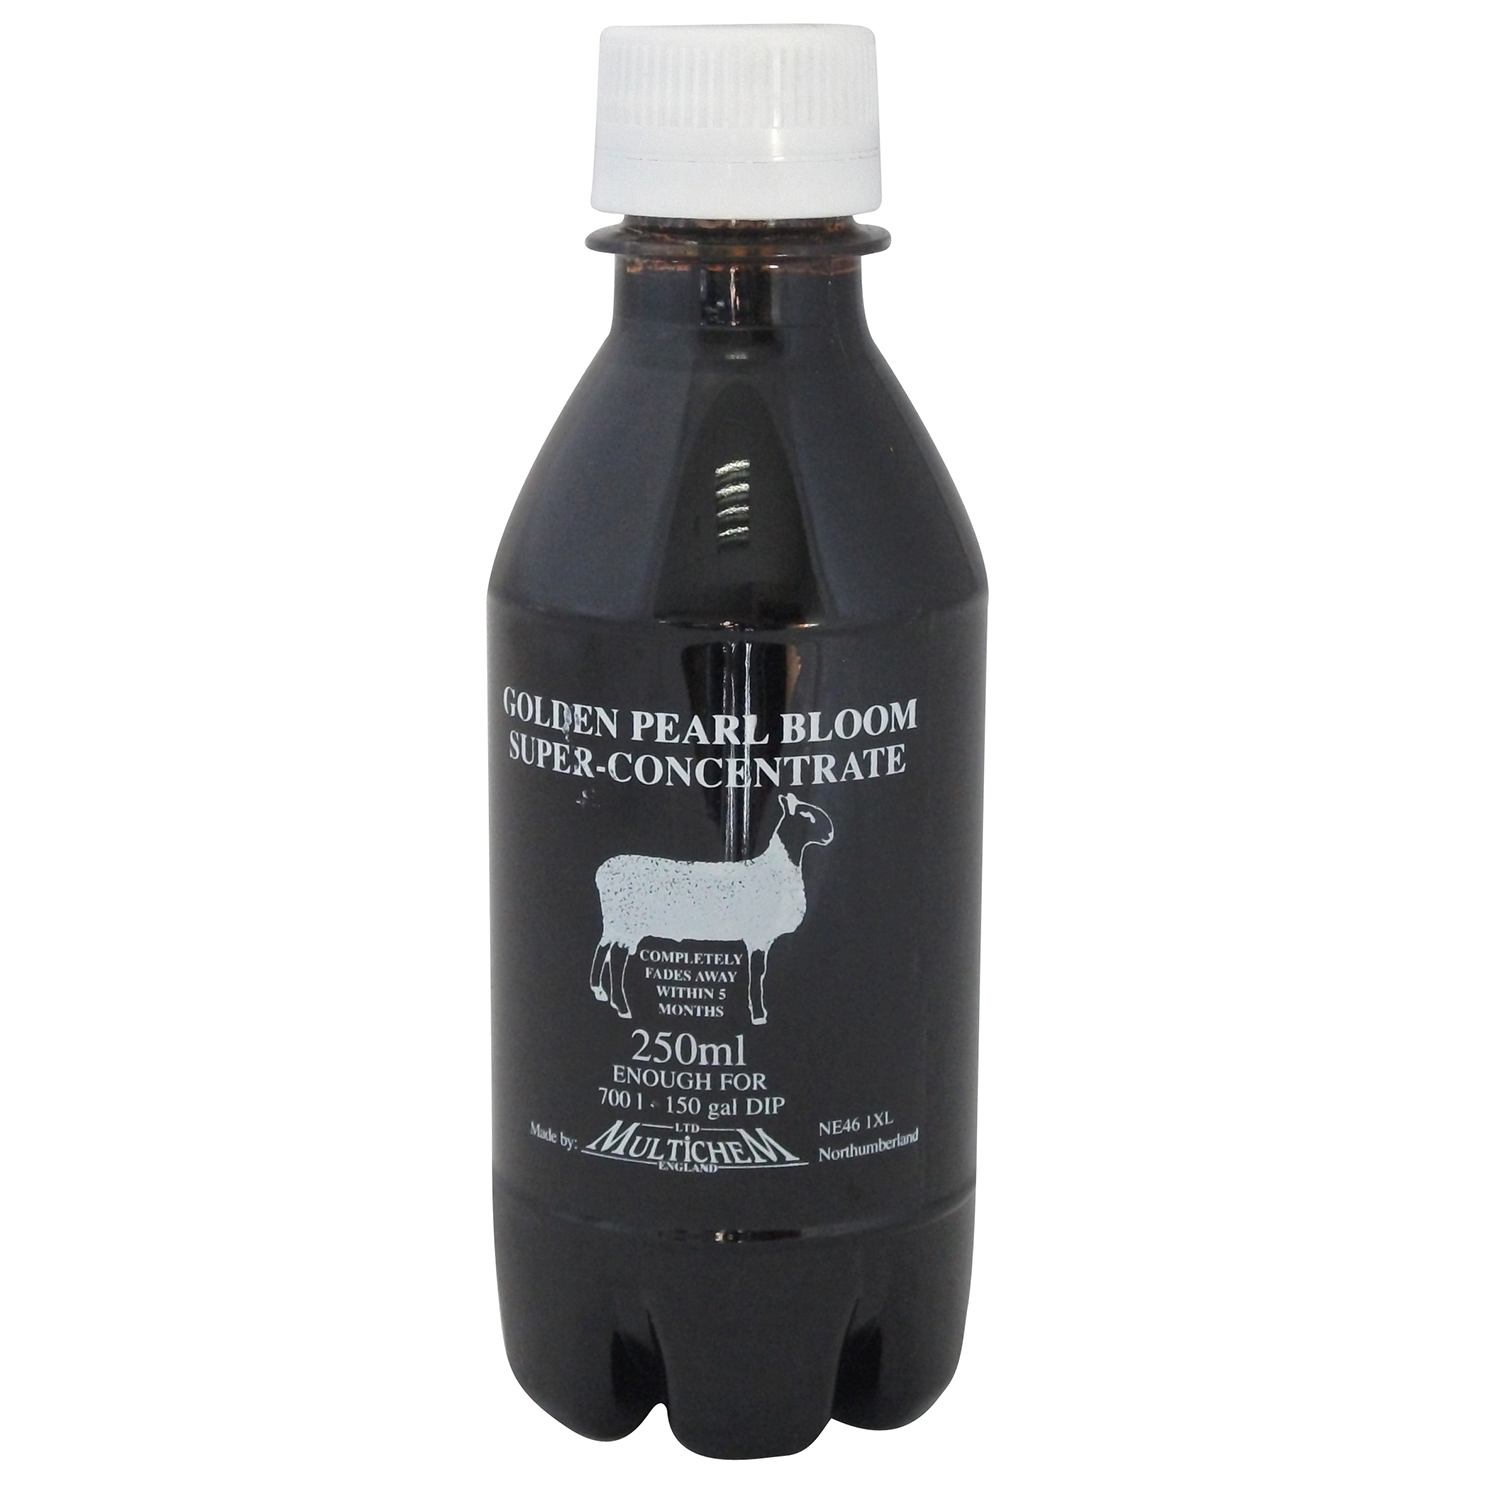 GOLDEN PEARL BLOOM DIP SUPER CONCENTRATE 250 ML